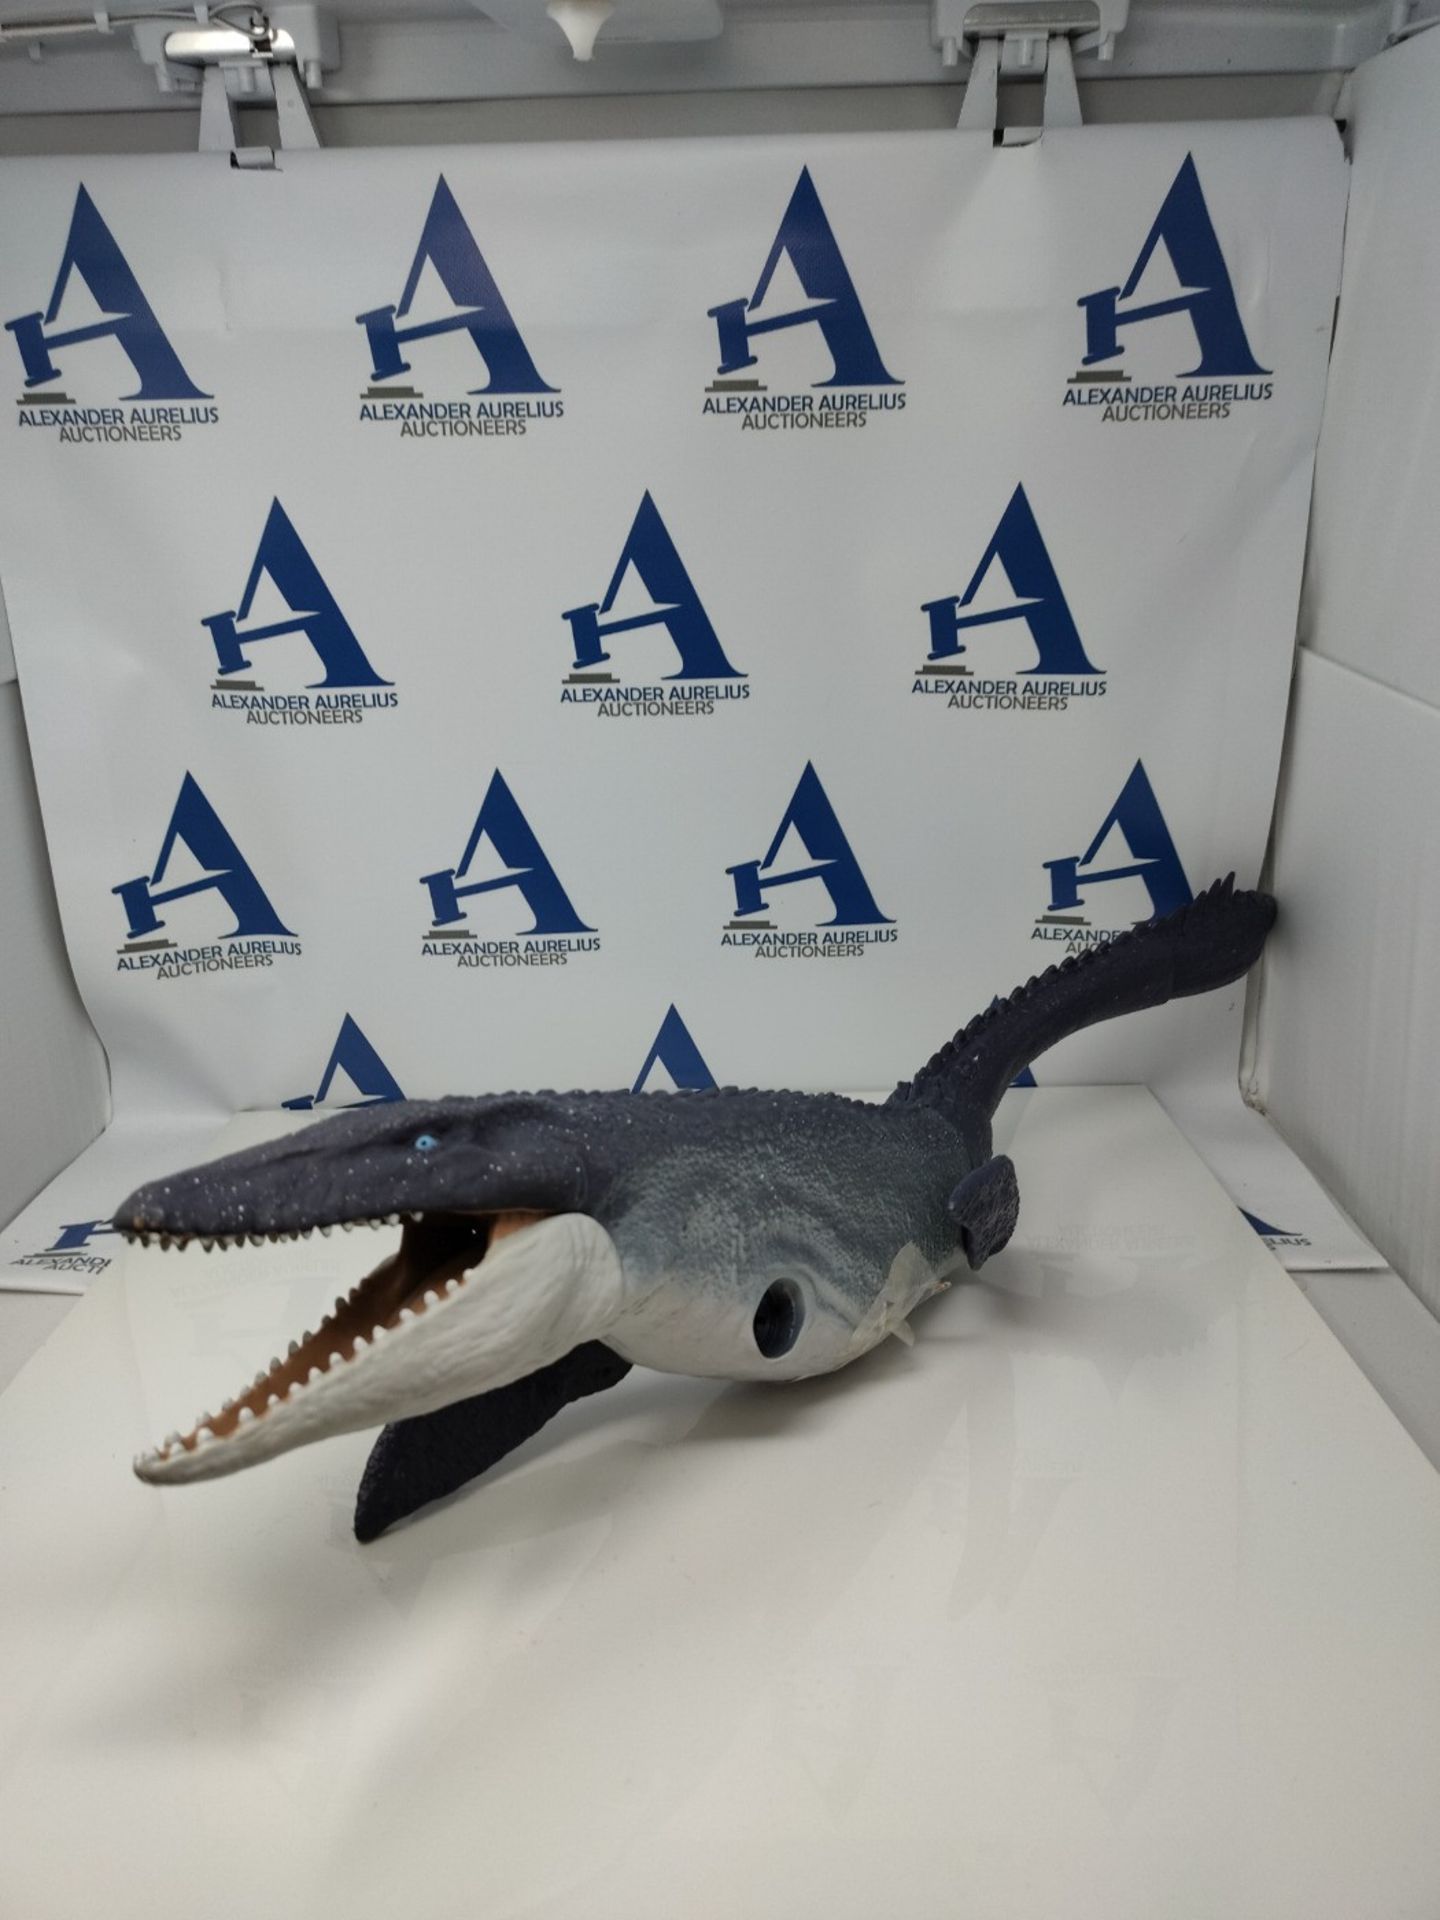 [INCOMPLETE] Jurassic World Ocean Protector Mosasaurus Dinosaur Action Figure Sculpted - Image 3 of 3